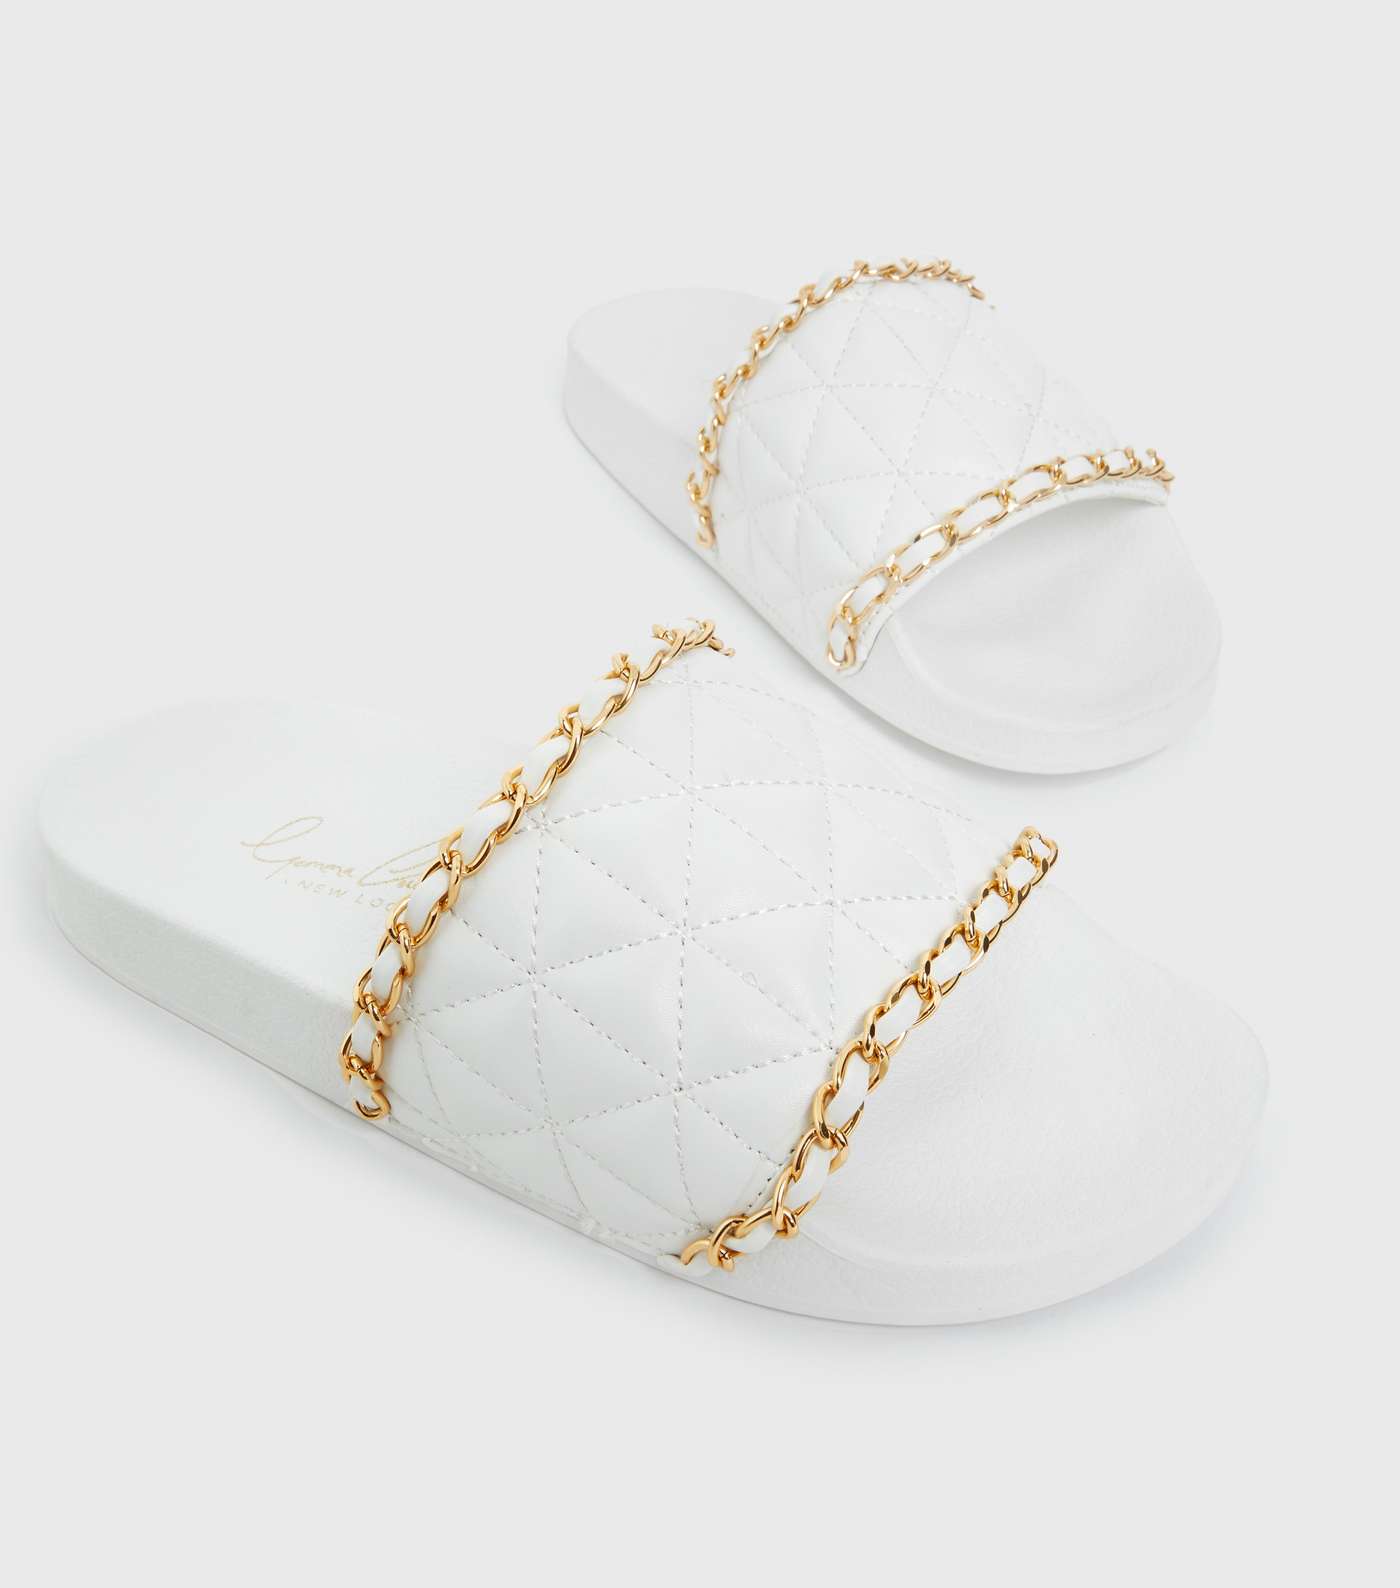 Bon Voyage White Leather-Look Chain Sliders Image 3